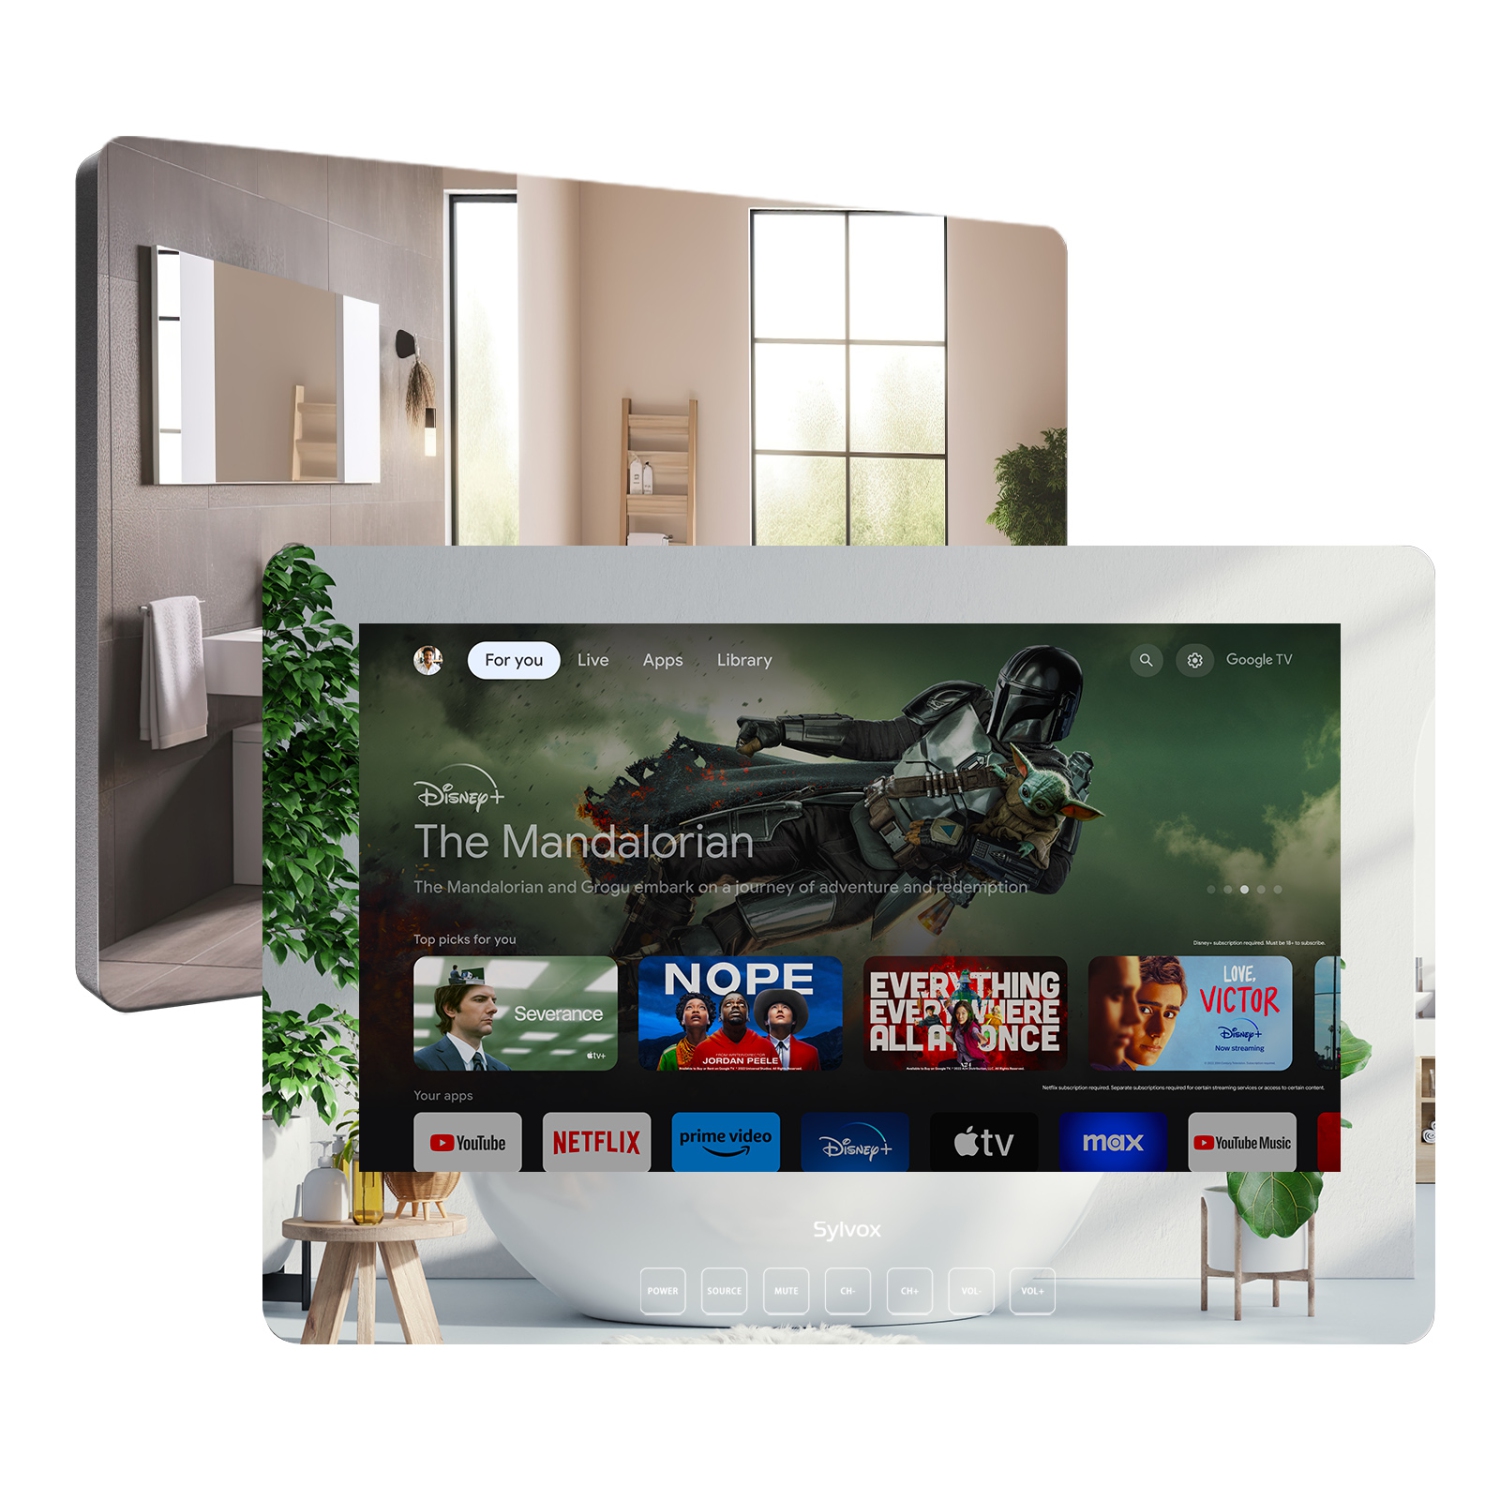 SYLVOX 24" Smart Mirror TV, Wall Mount Bathroom TV with Android 11.0 System, Google Play, Google Assistant, IP66 Waterproof TV Integrated NTSC & ATSC Tuner Support WiFi Bluetooth